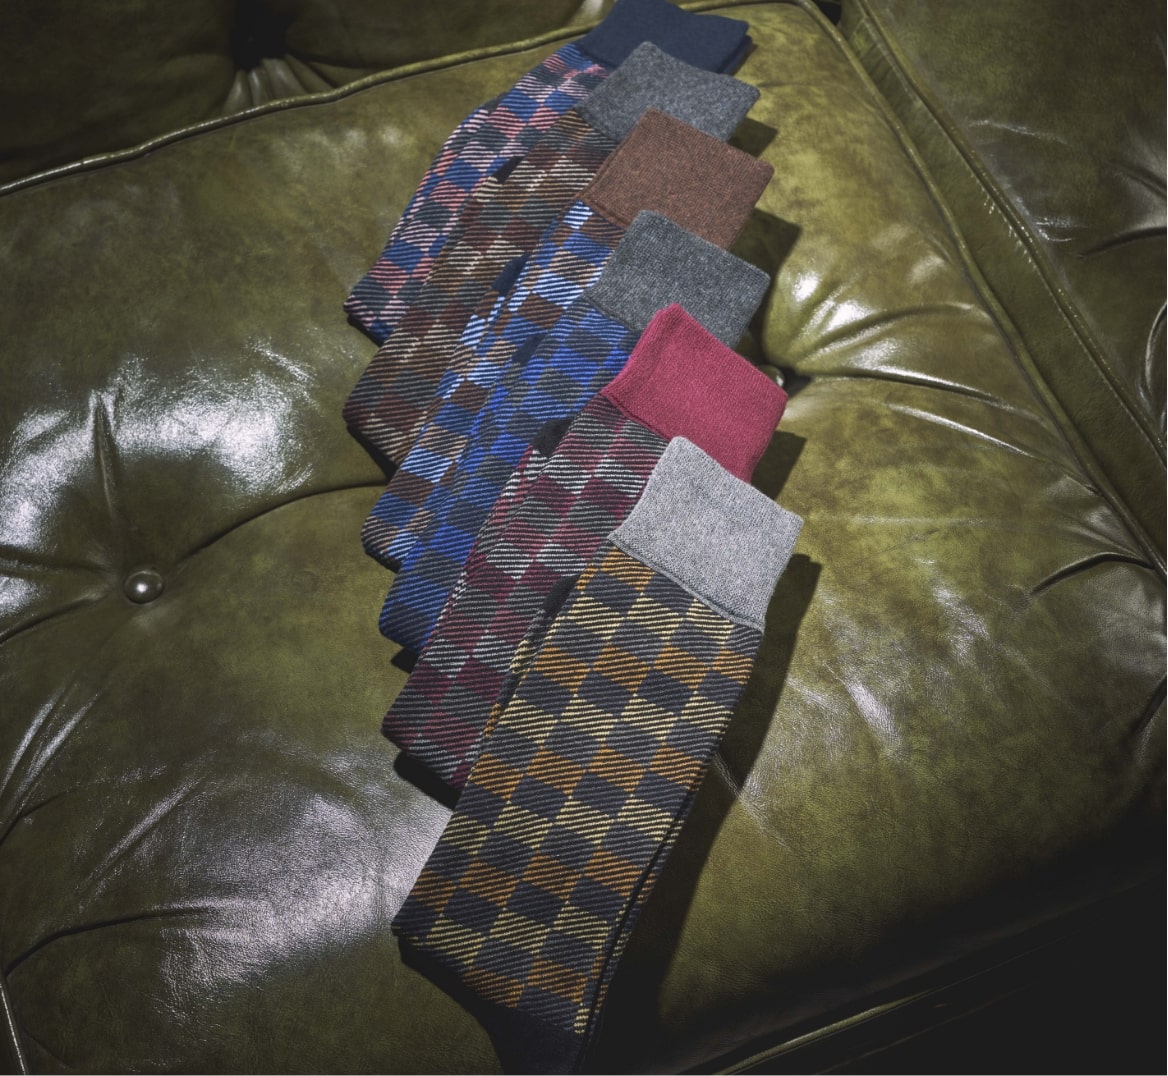 Click to shop Stacy Adams accessories. Image features the Cool Plaid socks.